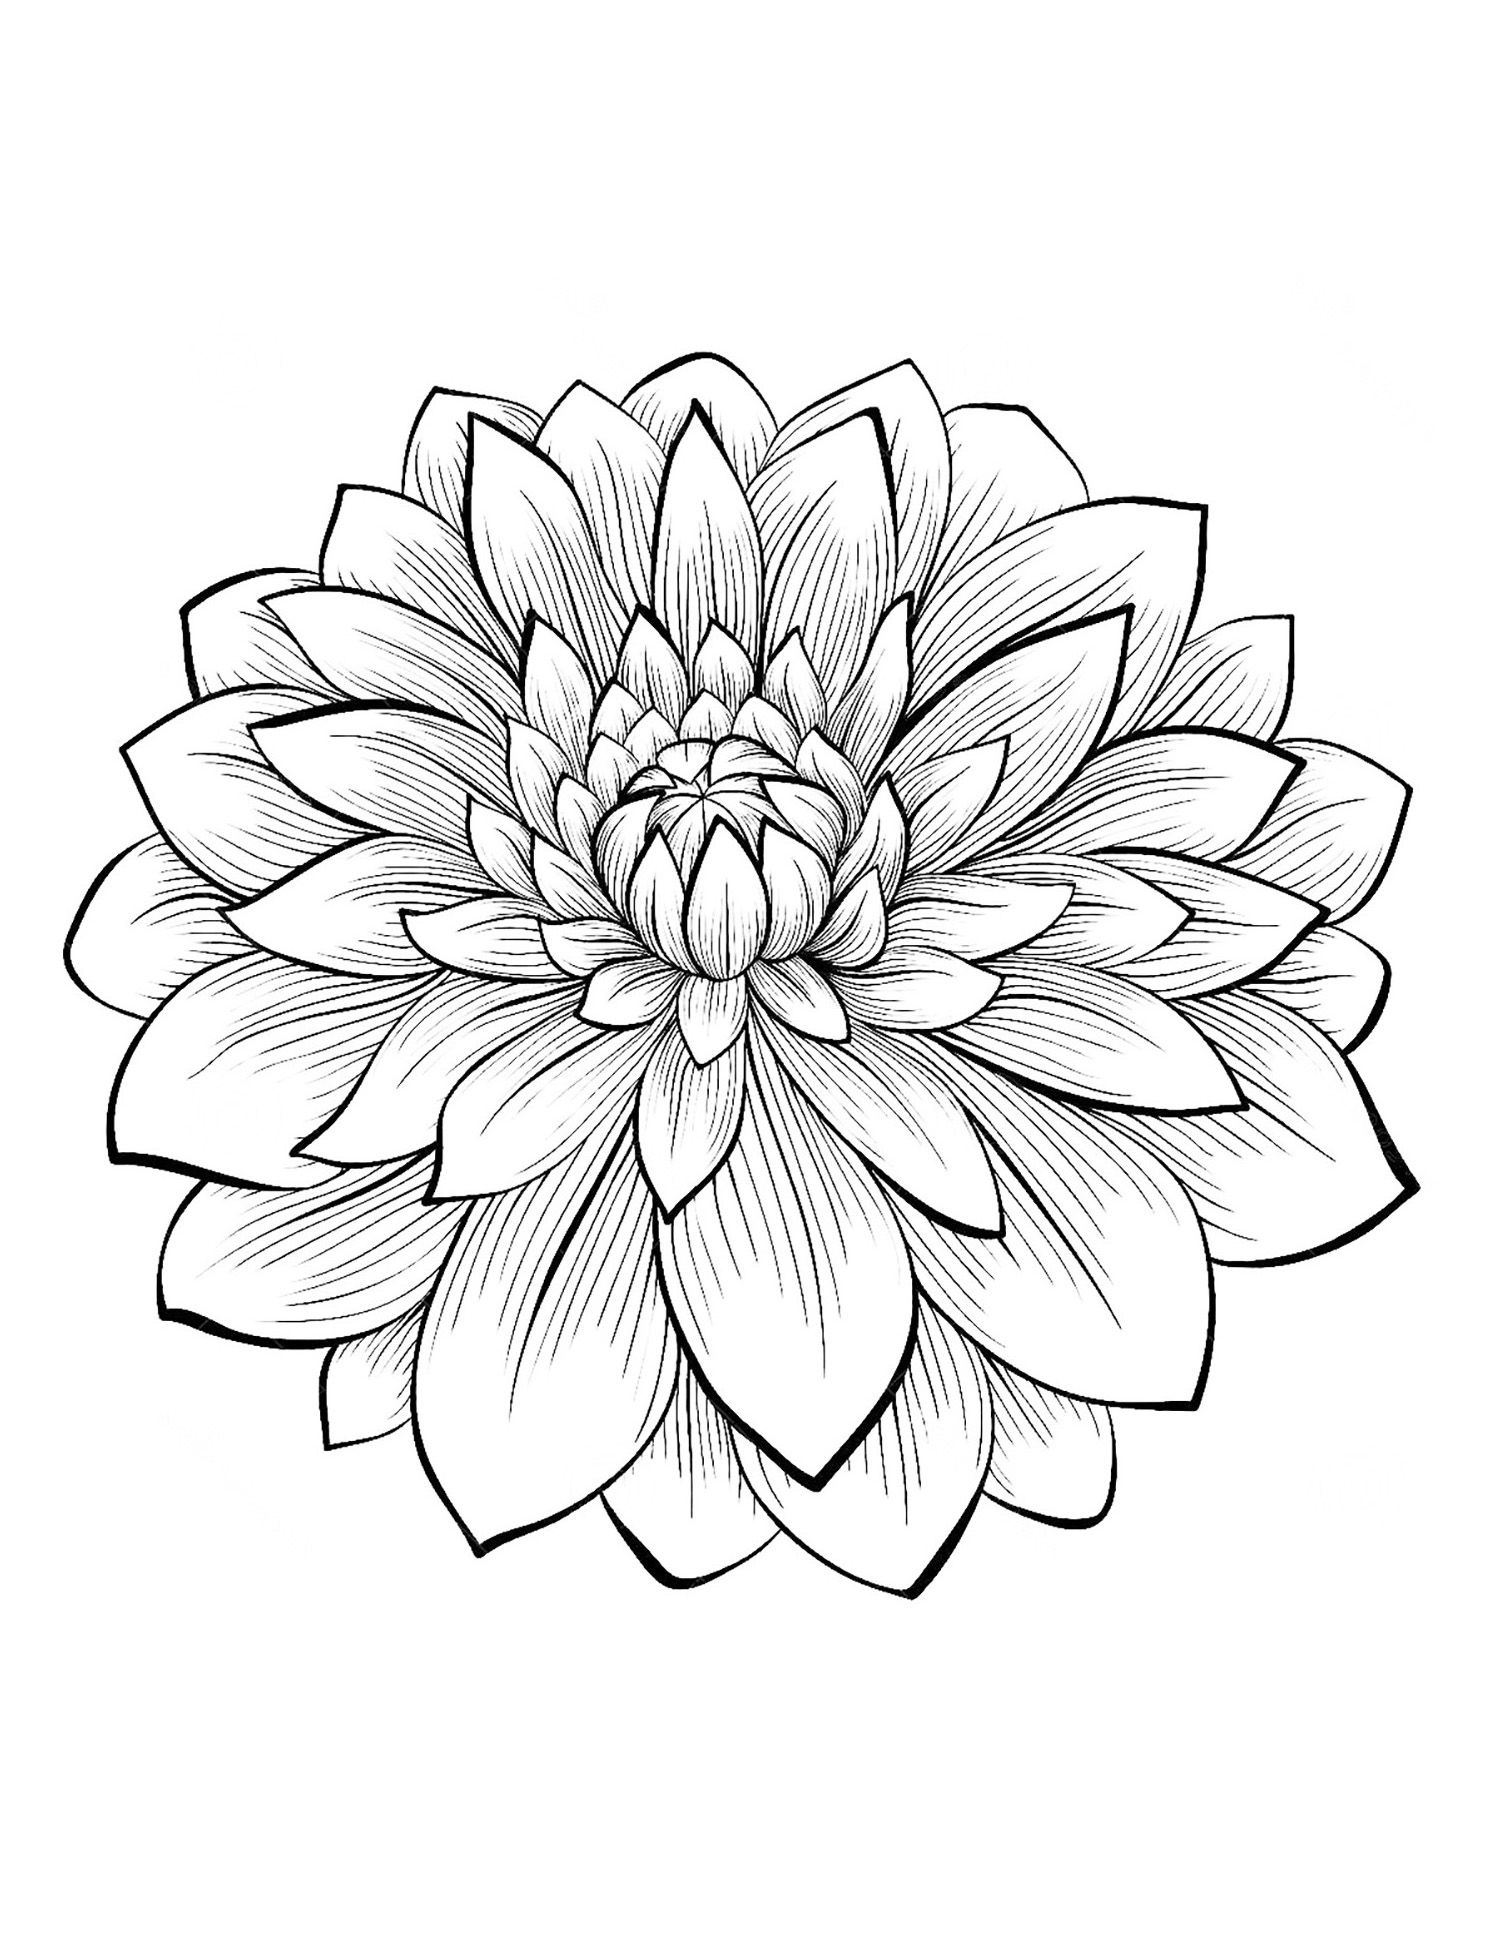 Dahlia : color one of the most beautiful flowers